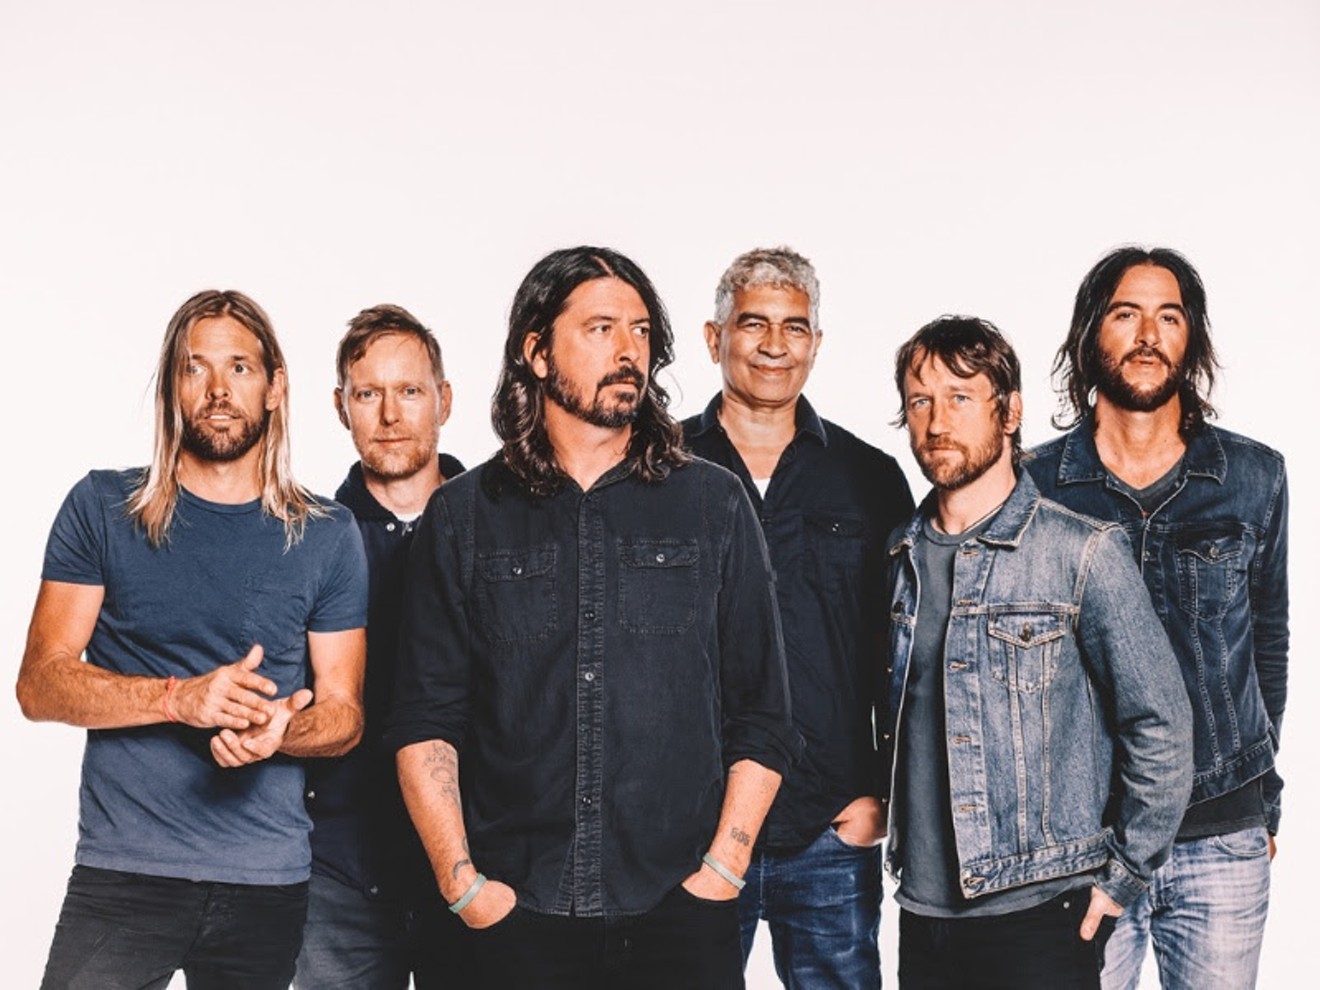 The Foo Fighters are bringing "Concrete and Gold" to Arizona this October